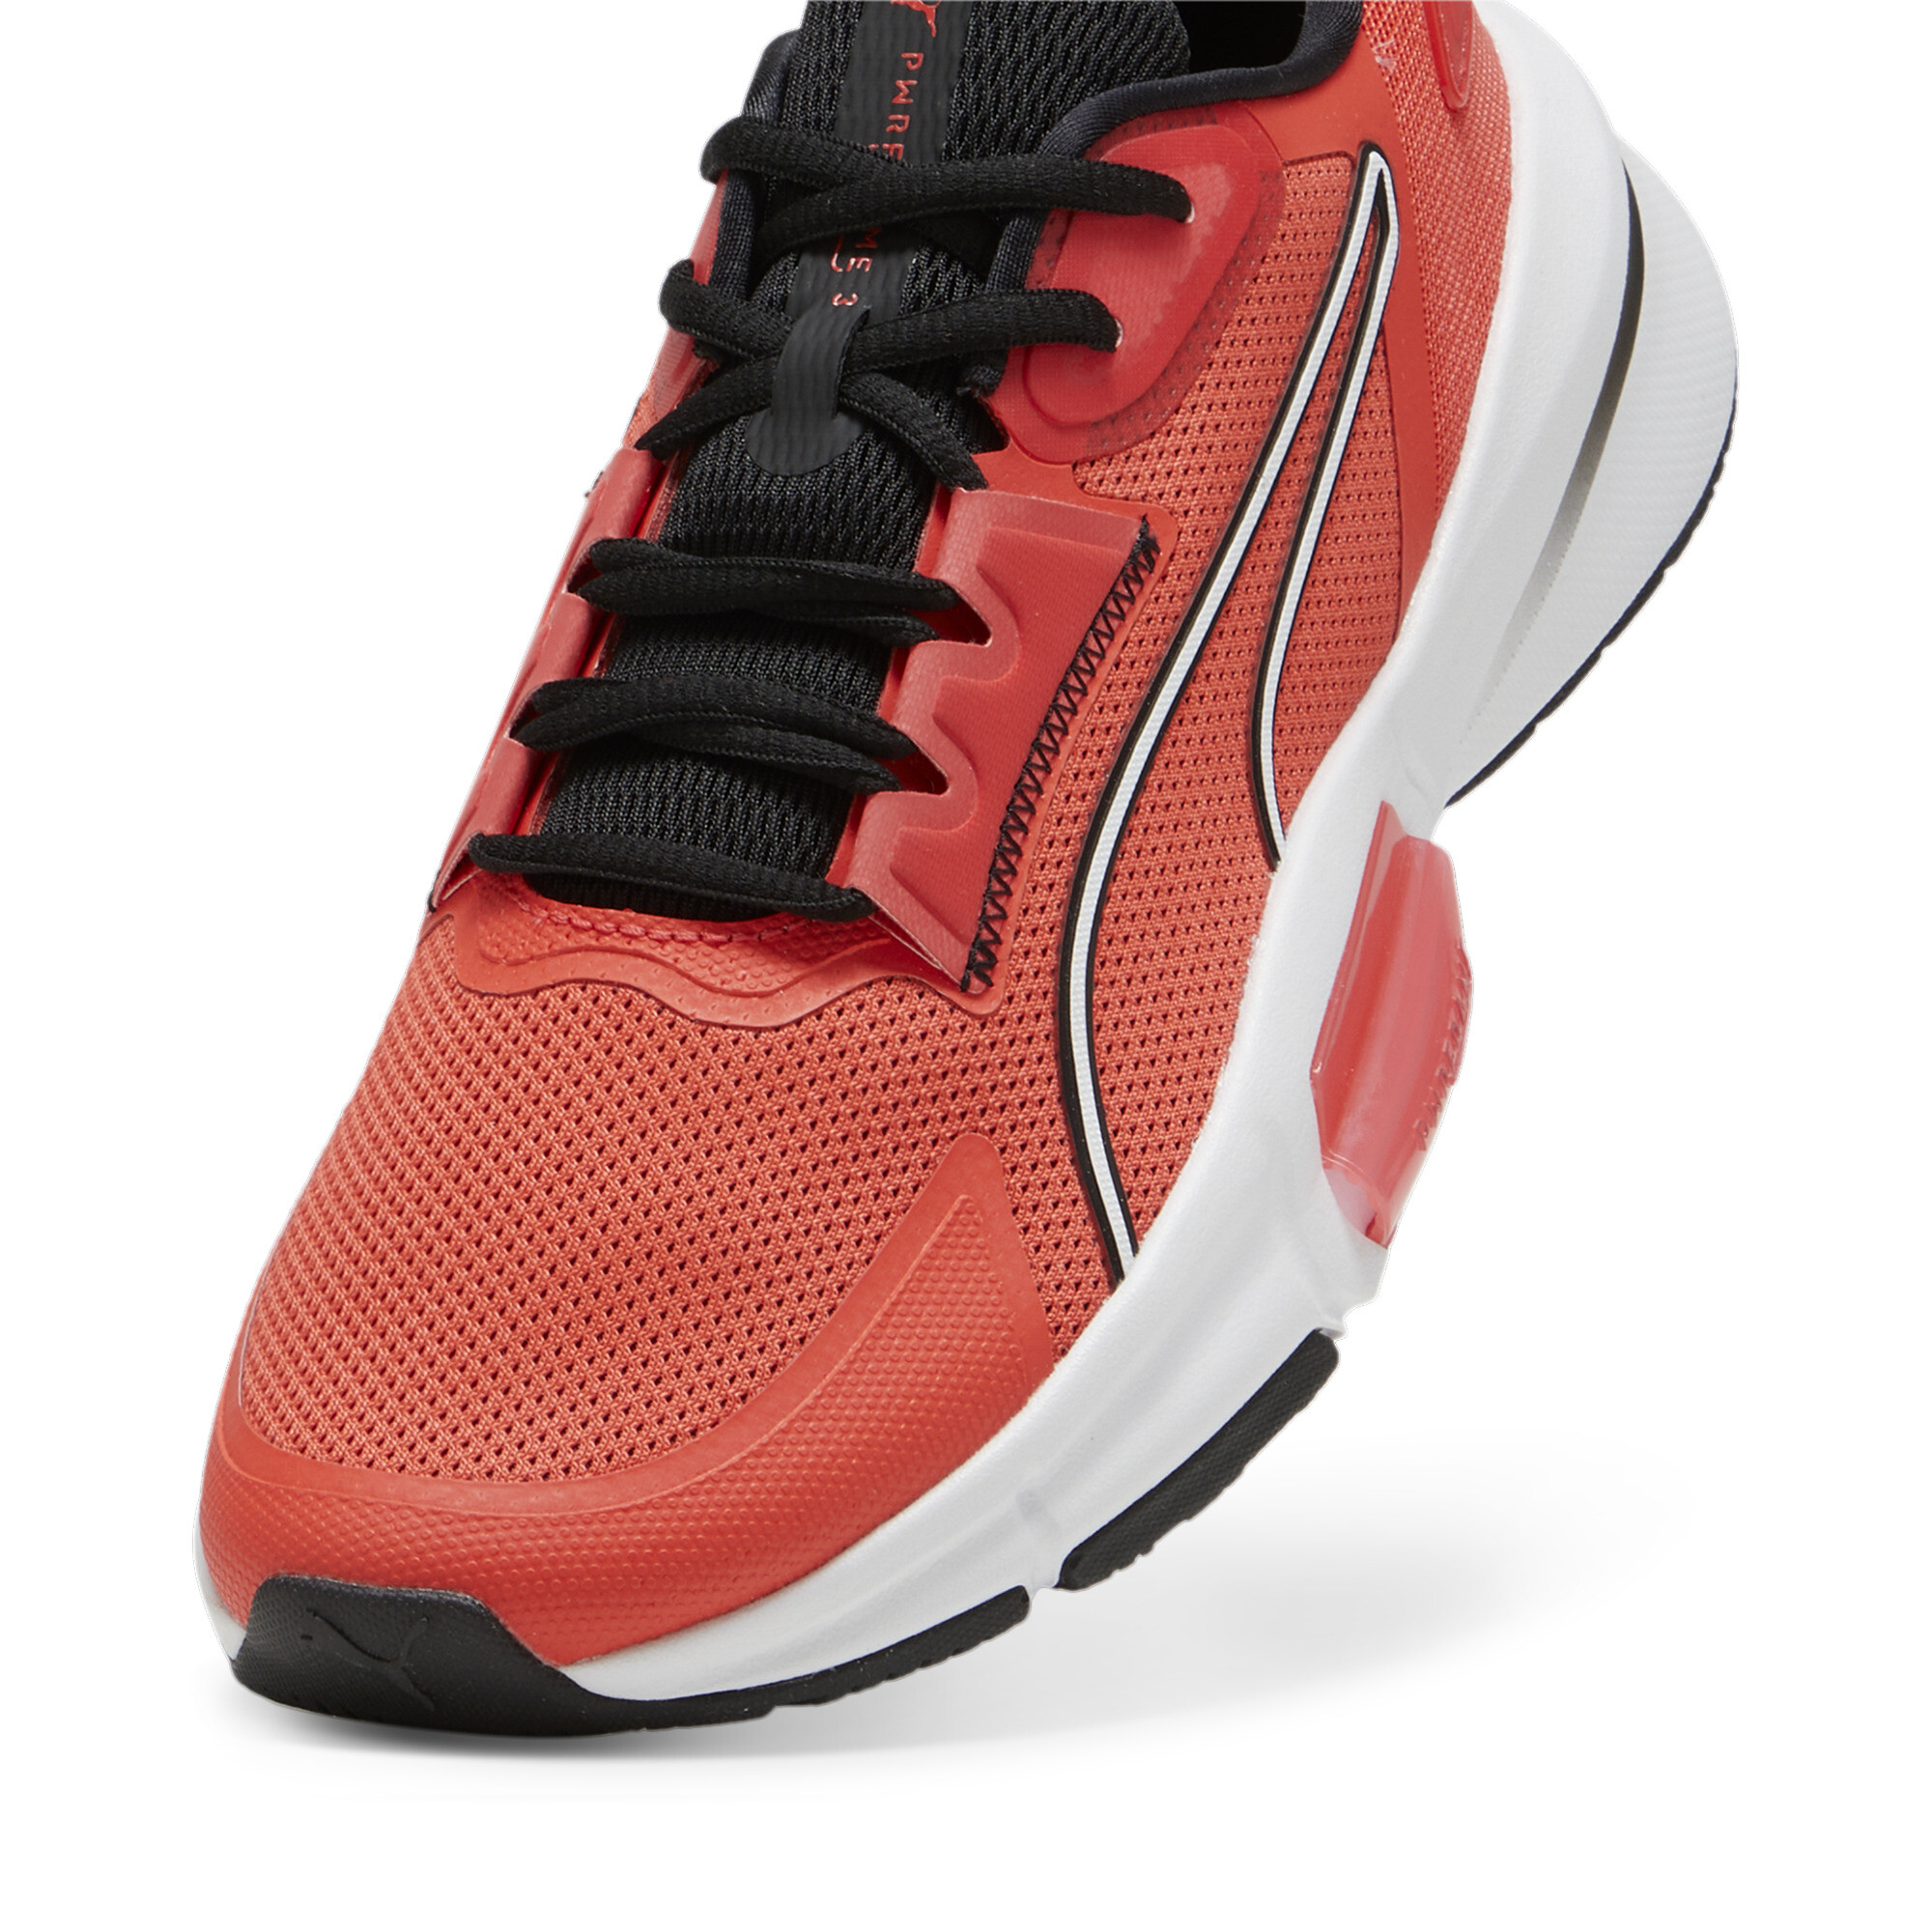 Men's PUMA PWRFrame TR 3 Training Shoes In Red, Size EU 39